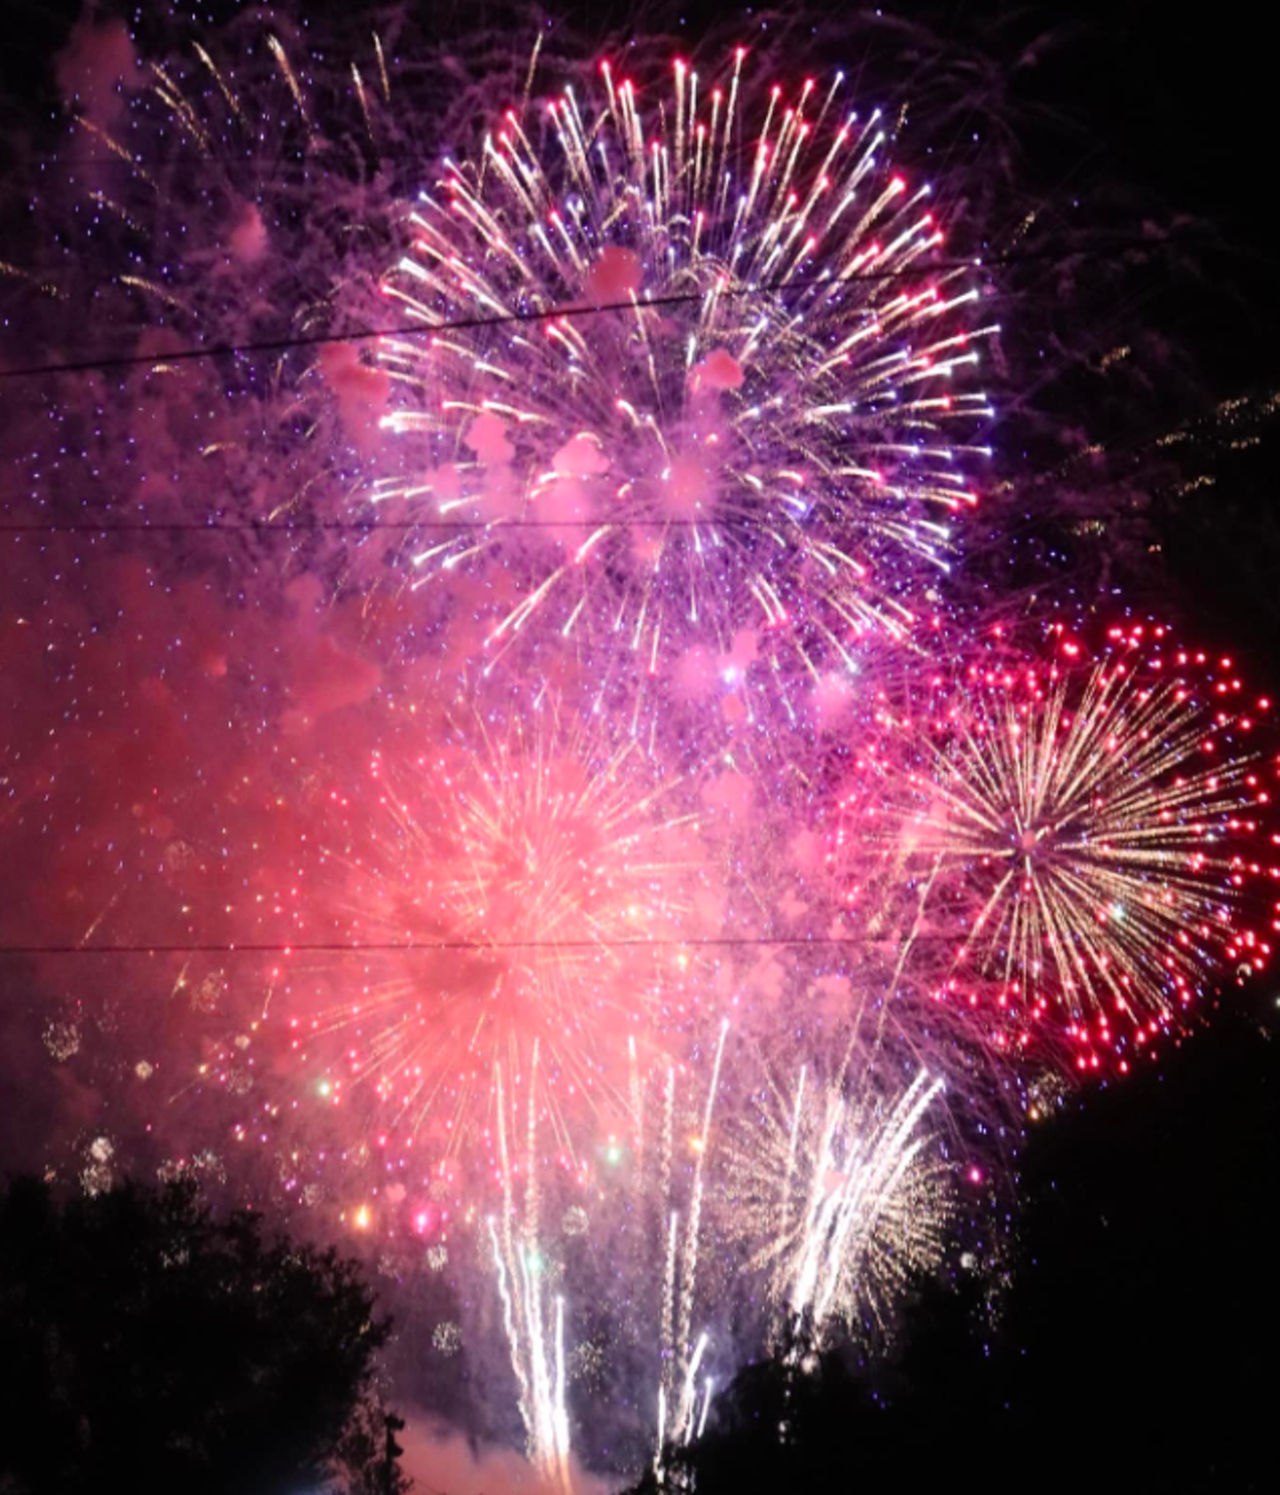 Davenport fourth of July celebration
Where: 400 E. Palm St., Davenport 
When: 3 p.m. Tuesday, July 4 
Bring a lawn chair and enjoy the festivities of live entertainment, food, craft vendors, and the largest firework display in Polk County.